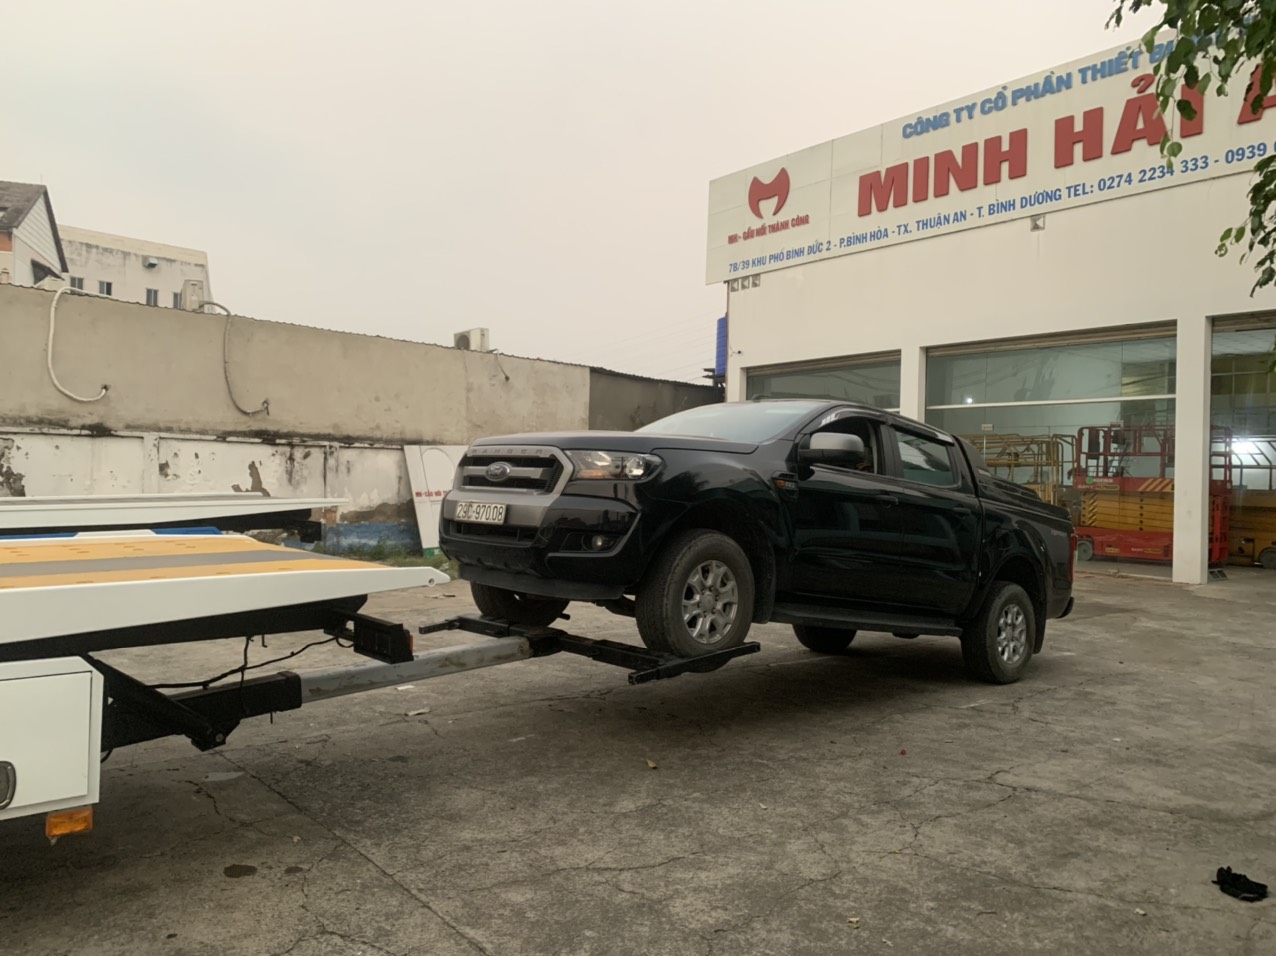 High quality flatbed wheel lift tow trucks for sale